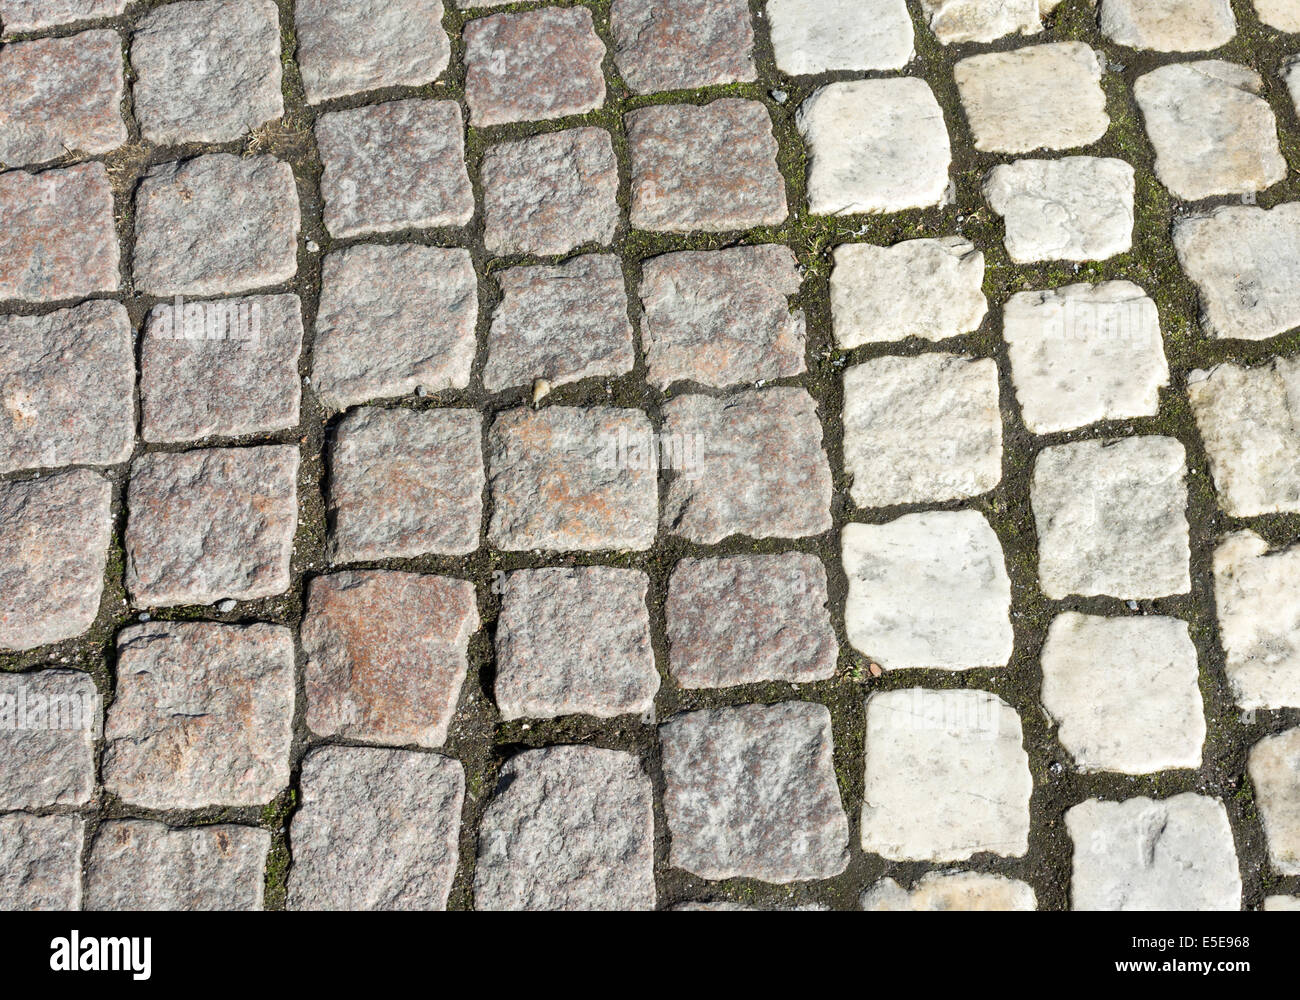 Curved stone pavement detail, Vallingby, Stockholm, Sweden. Stock Photo